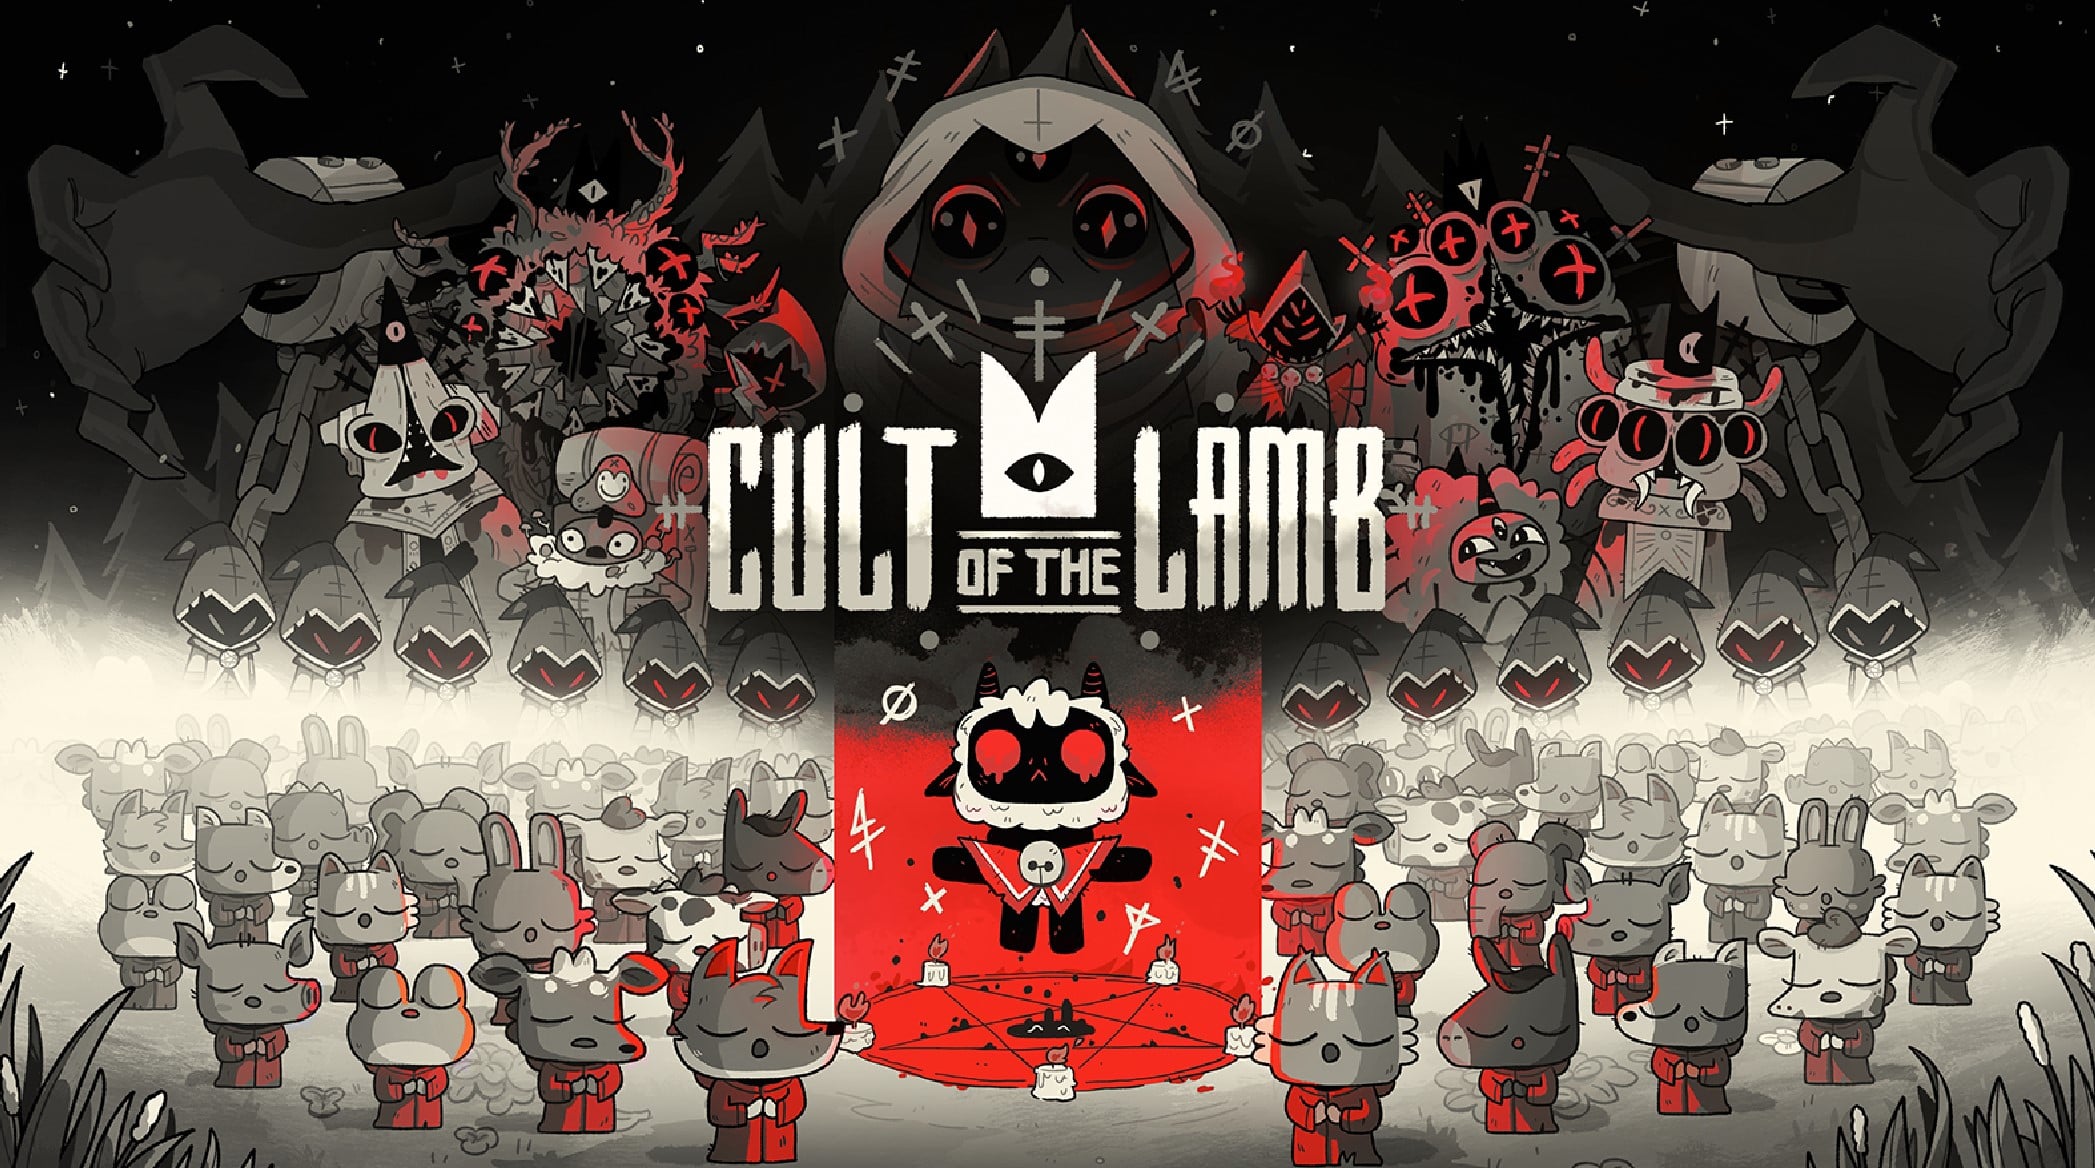 Cult of the Lamb signs itself up for a sex update after underestimating the  thirst of the roguelike's community